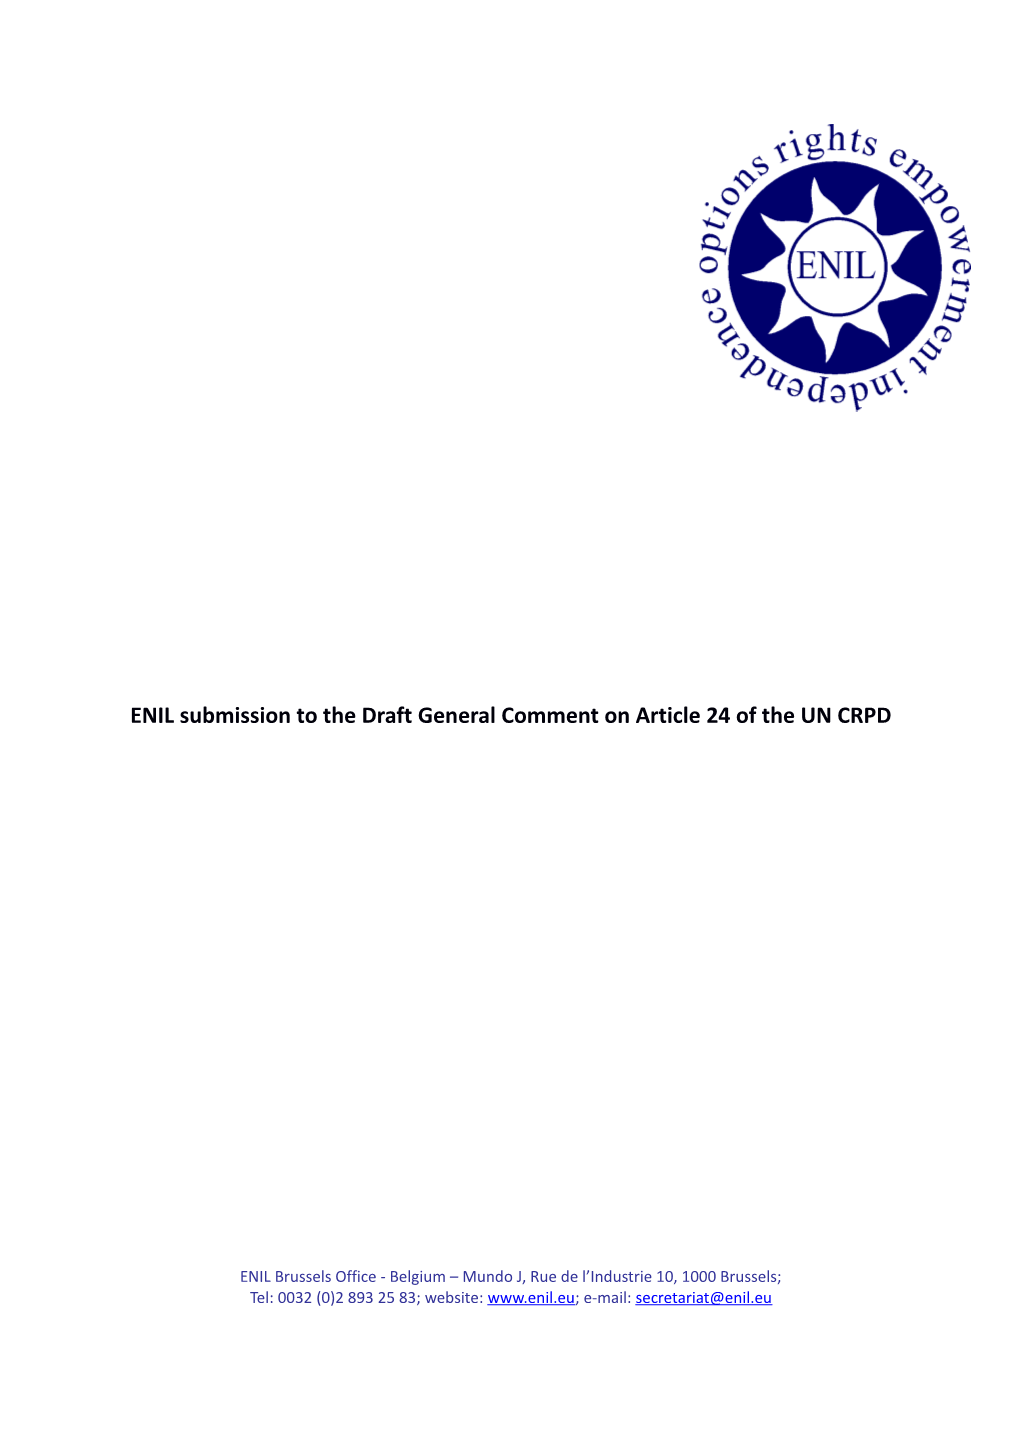 ENIL Submission to the Draft General Comment on Article 24 of the UN CRPD